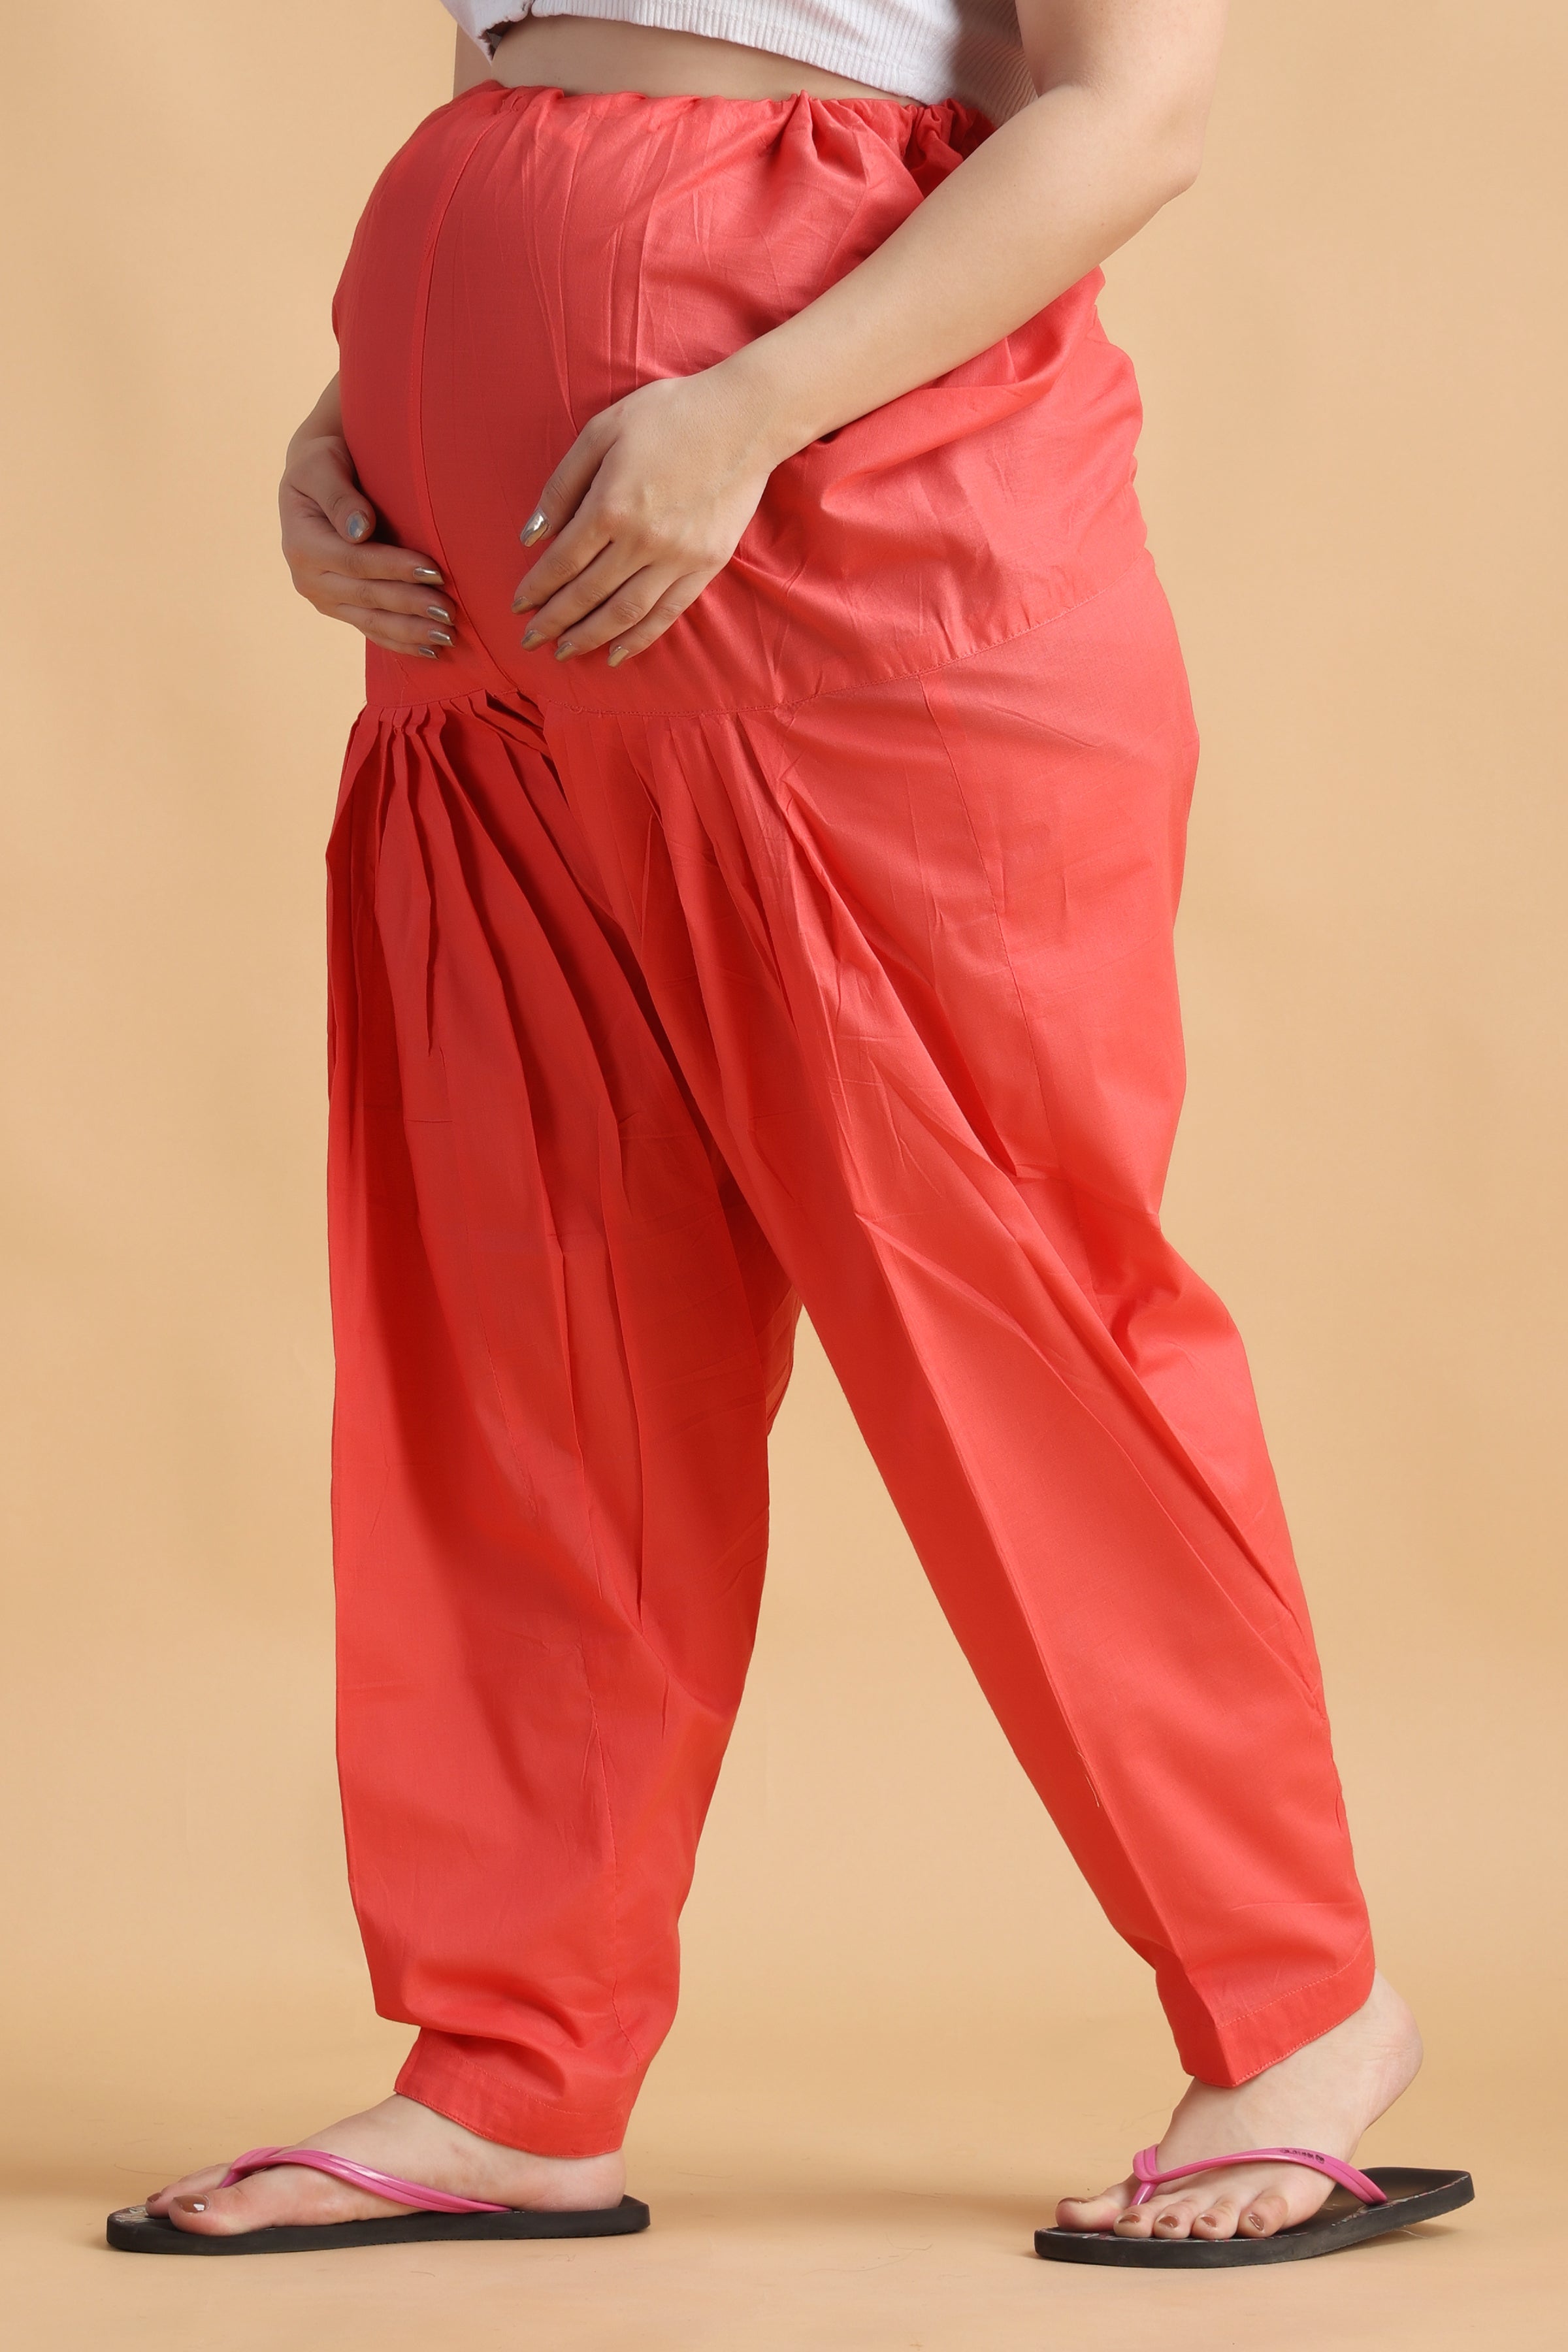 Wide Leg Female Pants Maternity Trousers For Pregnant Women Casual Loose  High Waist, हाई वेस्टेड पैंट - My Online Collection Store, Bengaluru | ID:  2851553373973